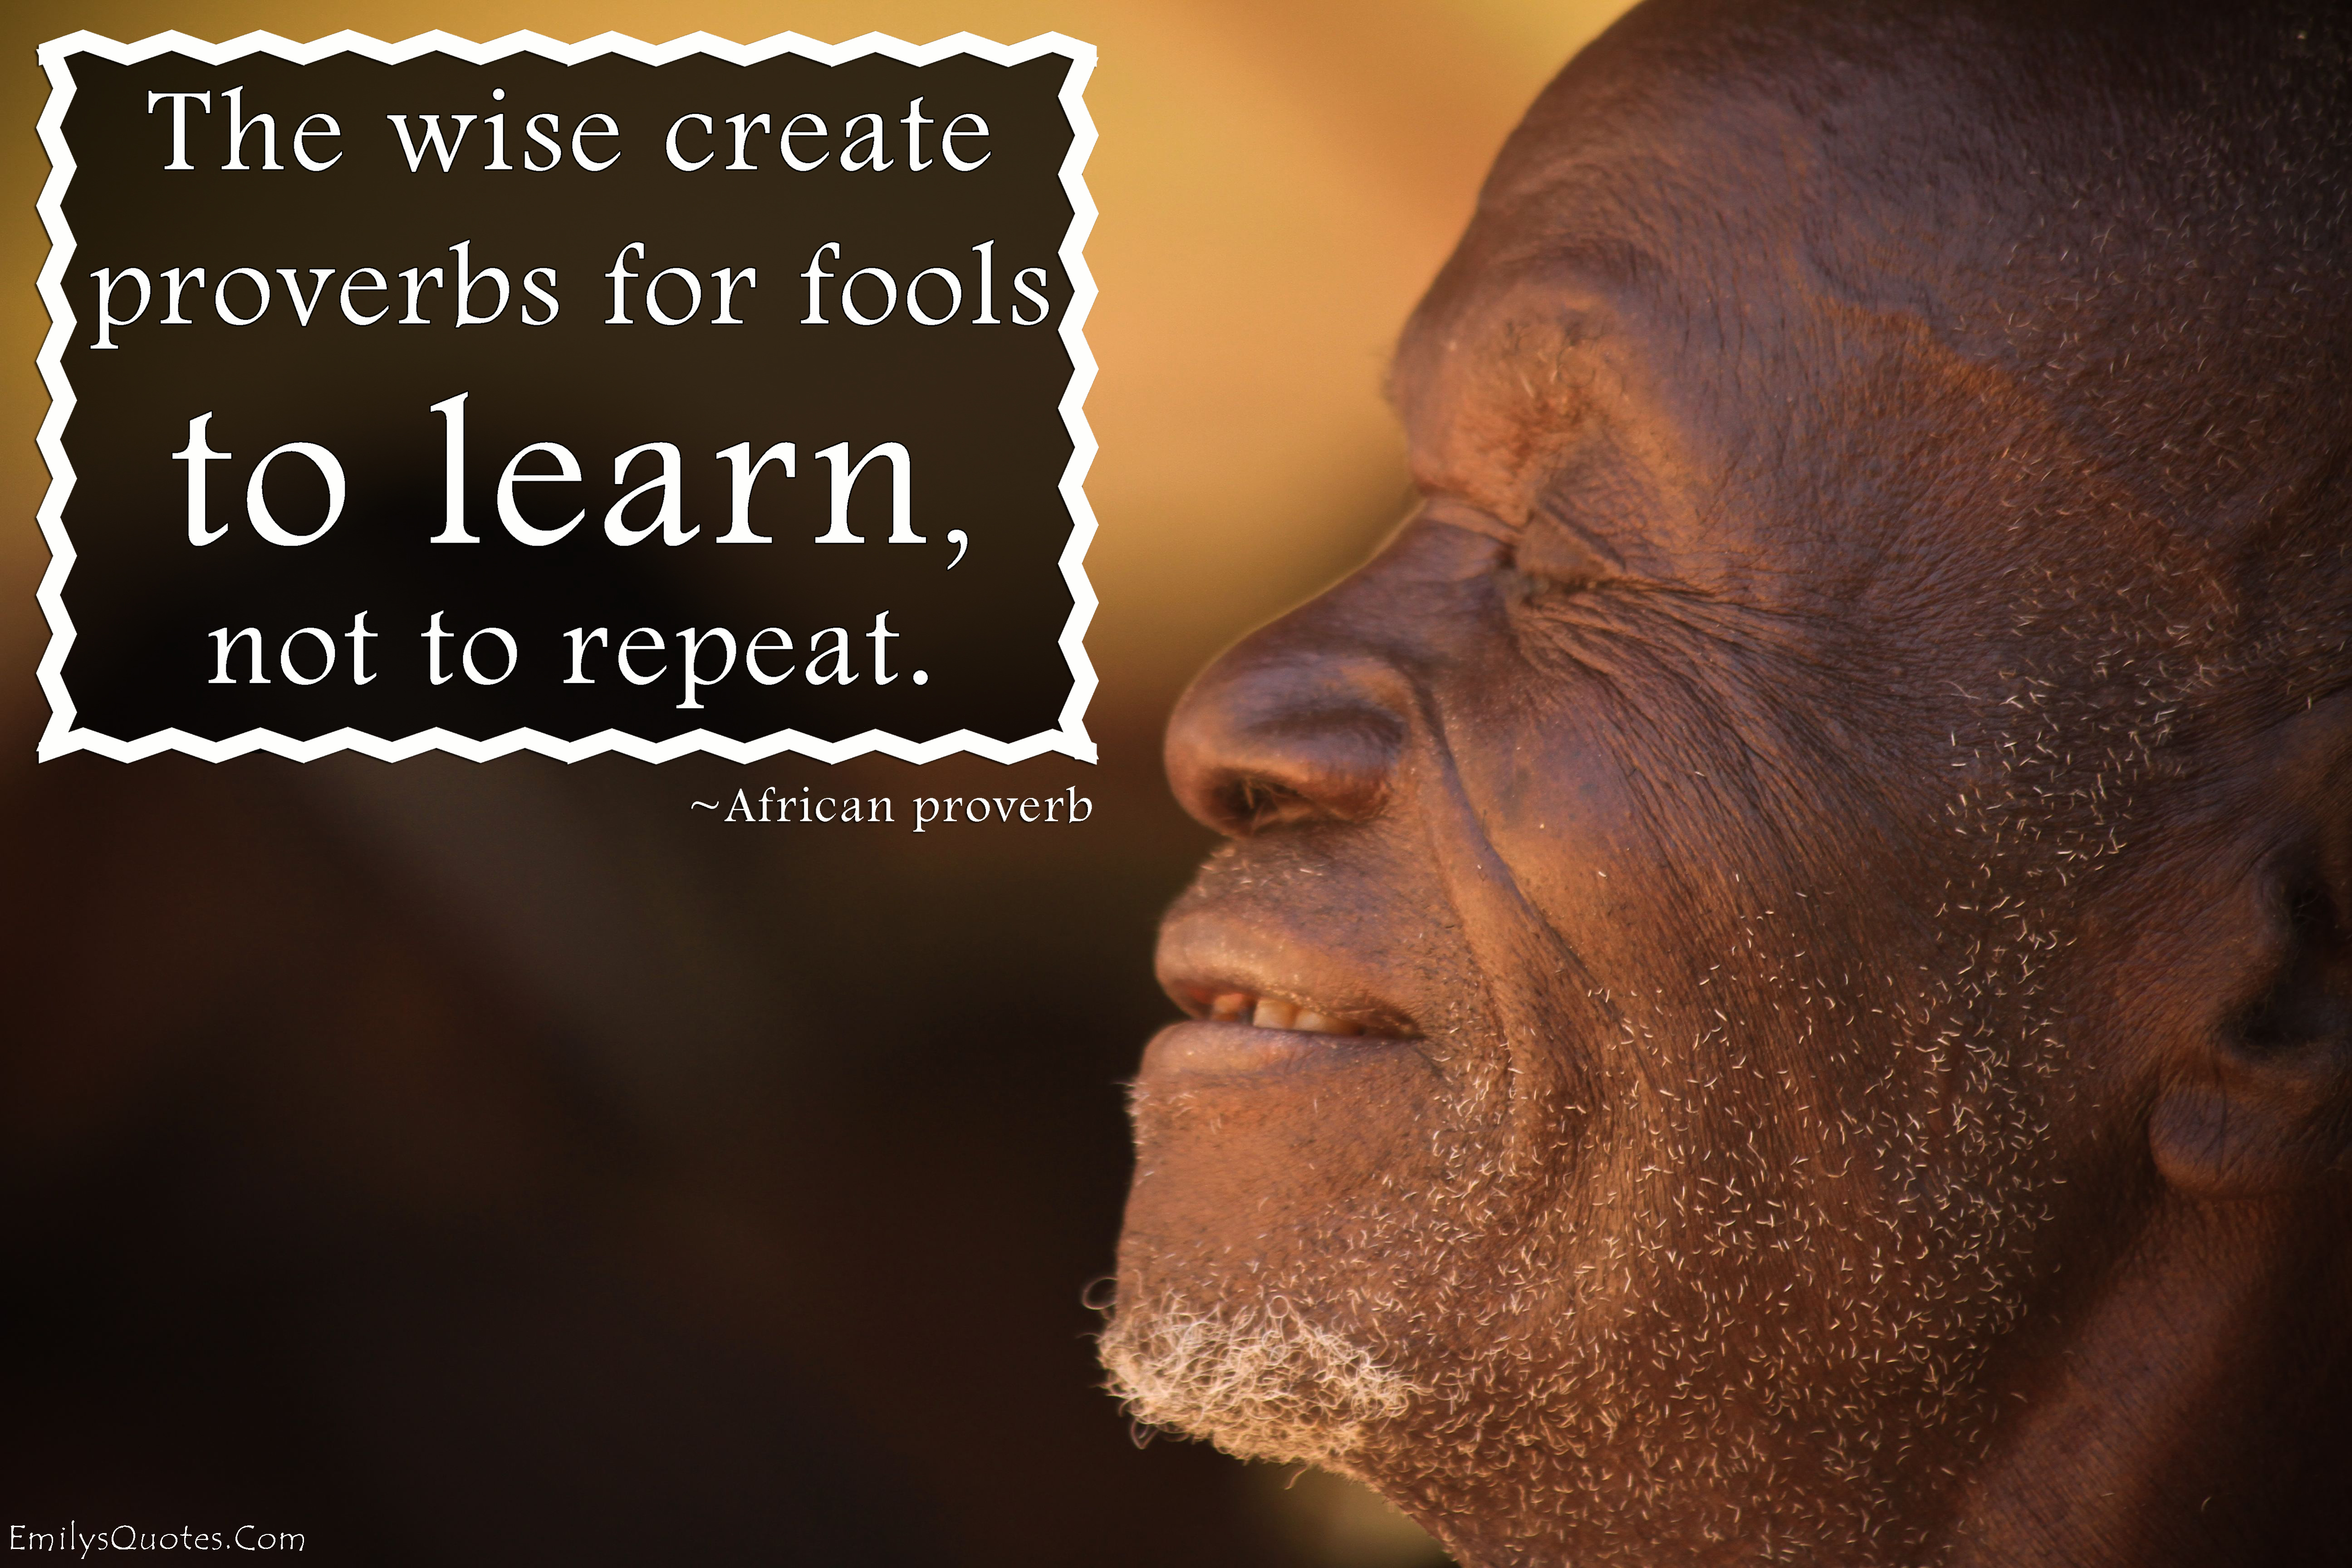 The wise create proverbs for fools to learn, not to repeat